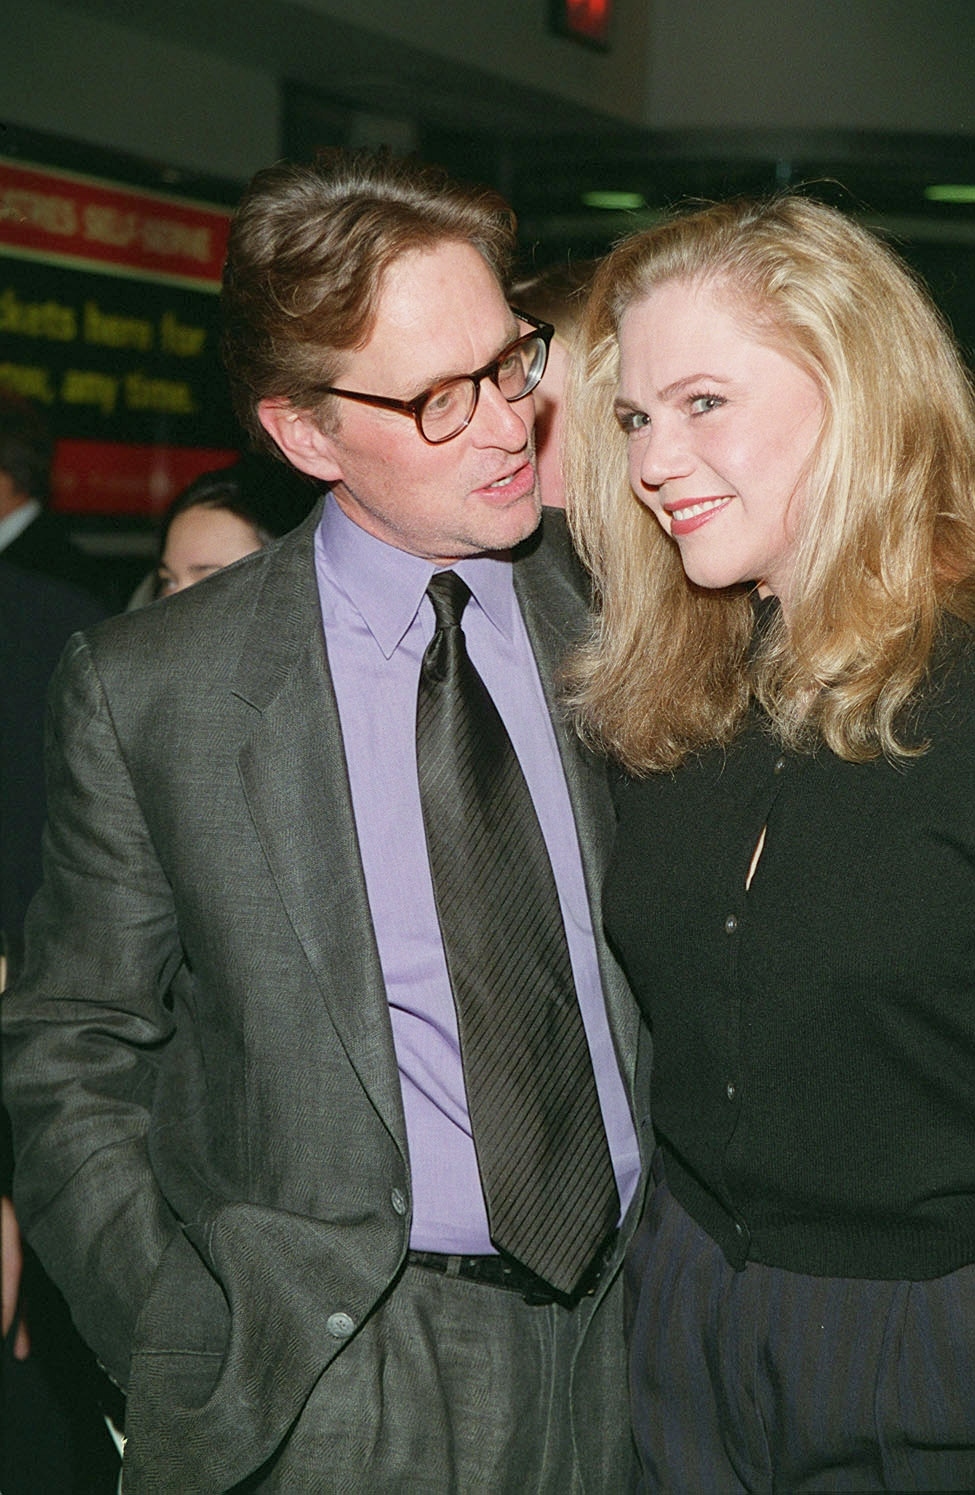 Michael Douglas and Kathleen Turner at the premiere of "Living Out Loud" in 1998 | Source: Getty Images